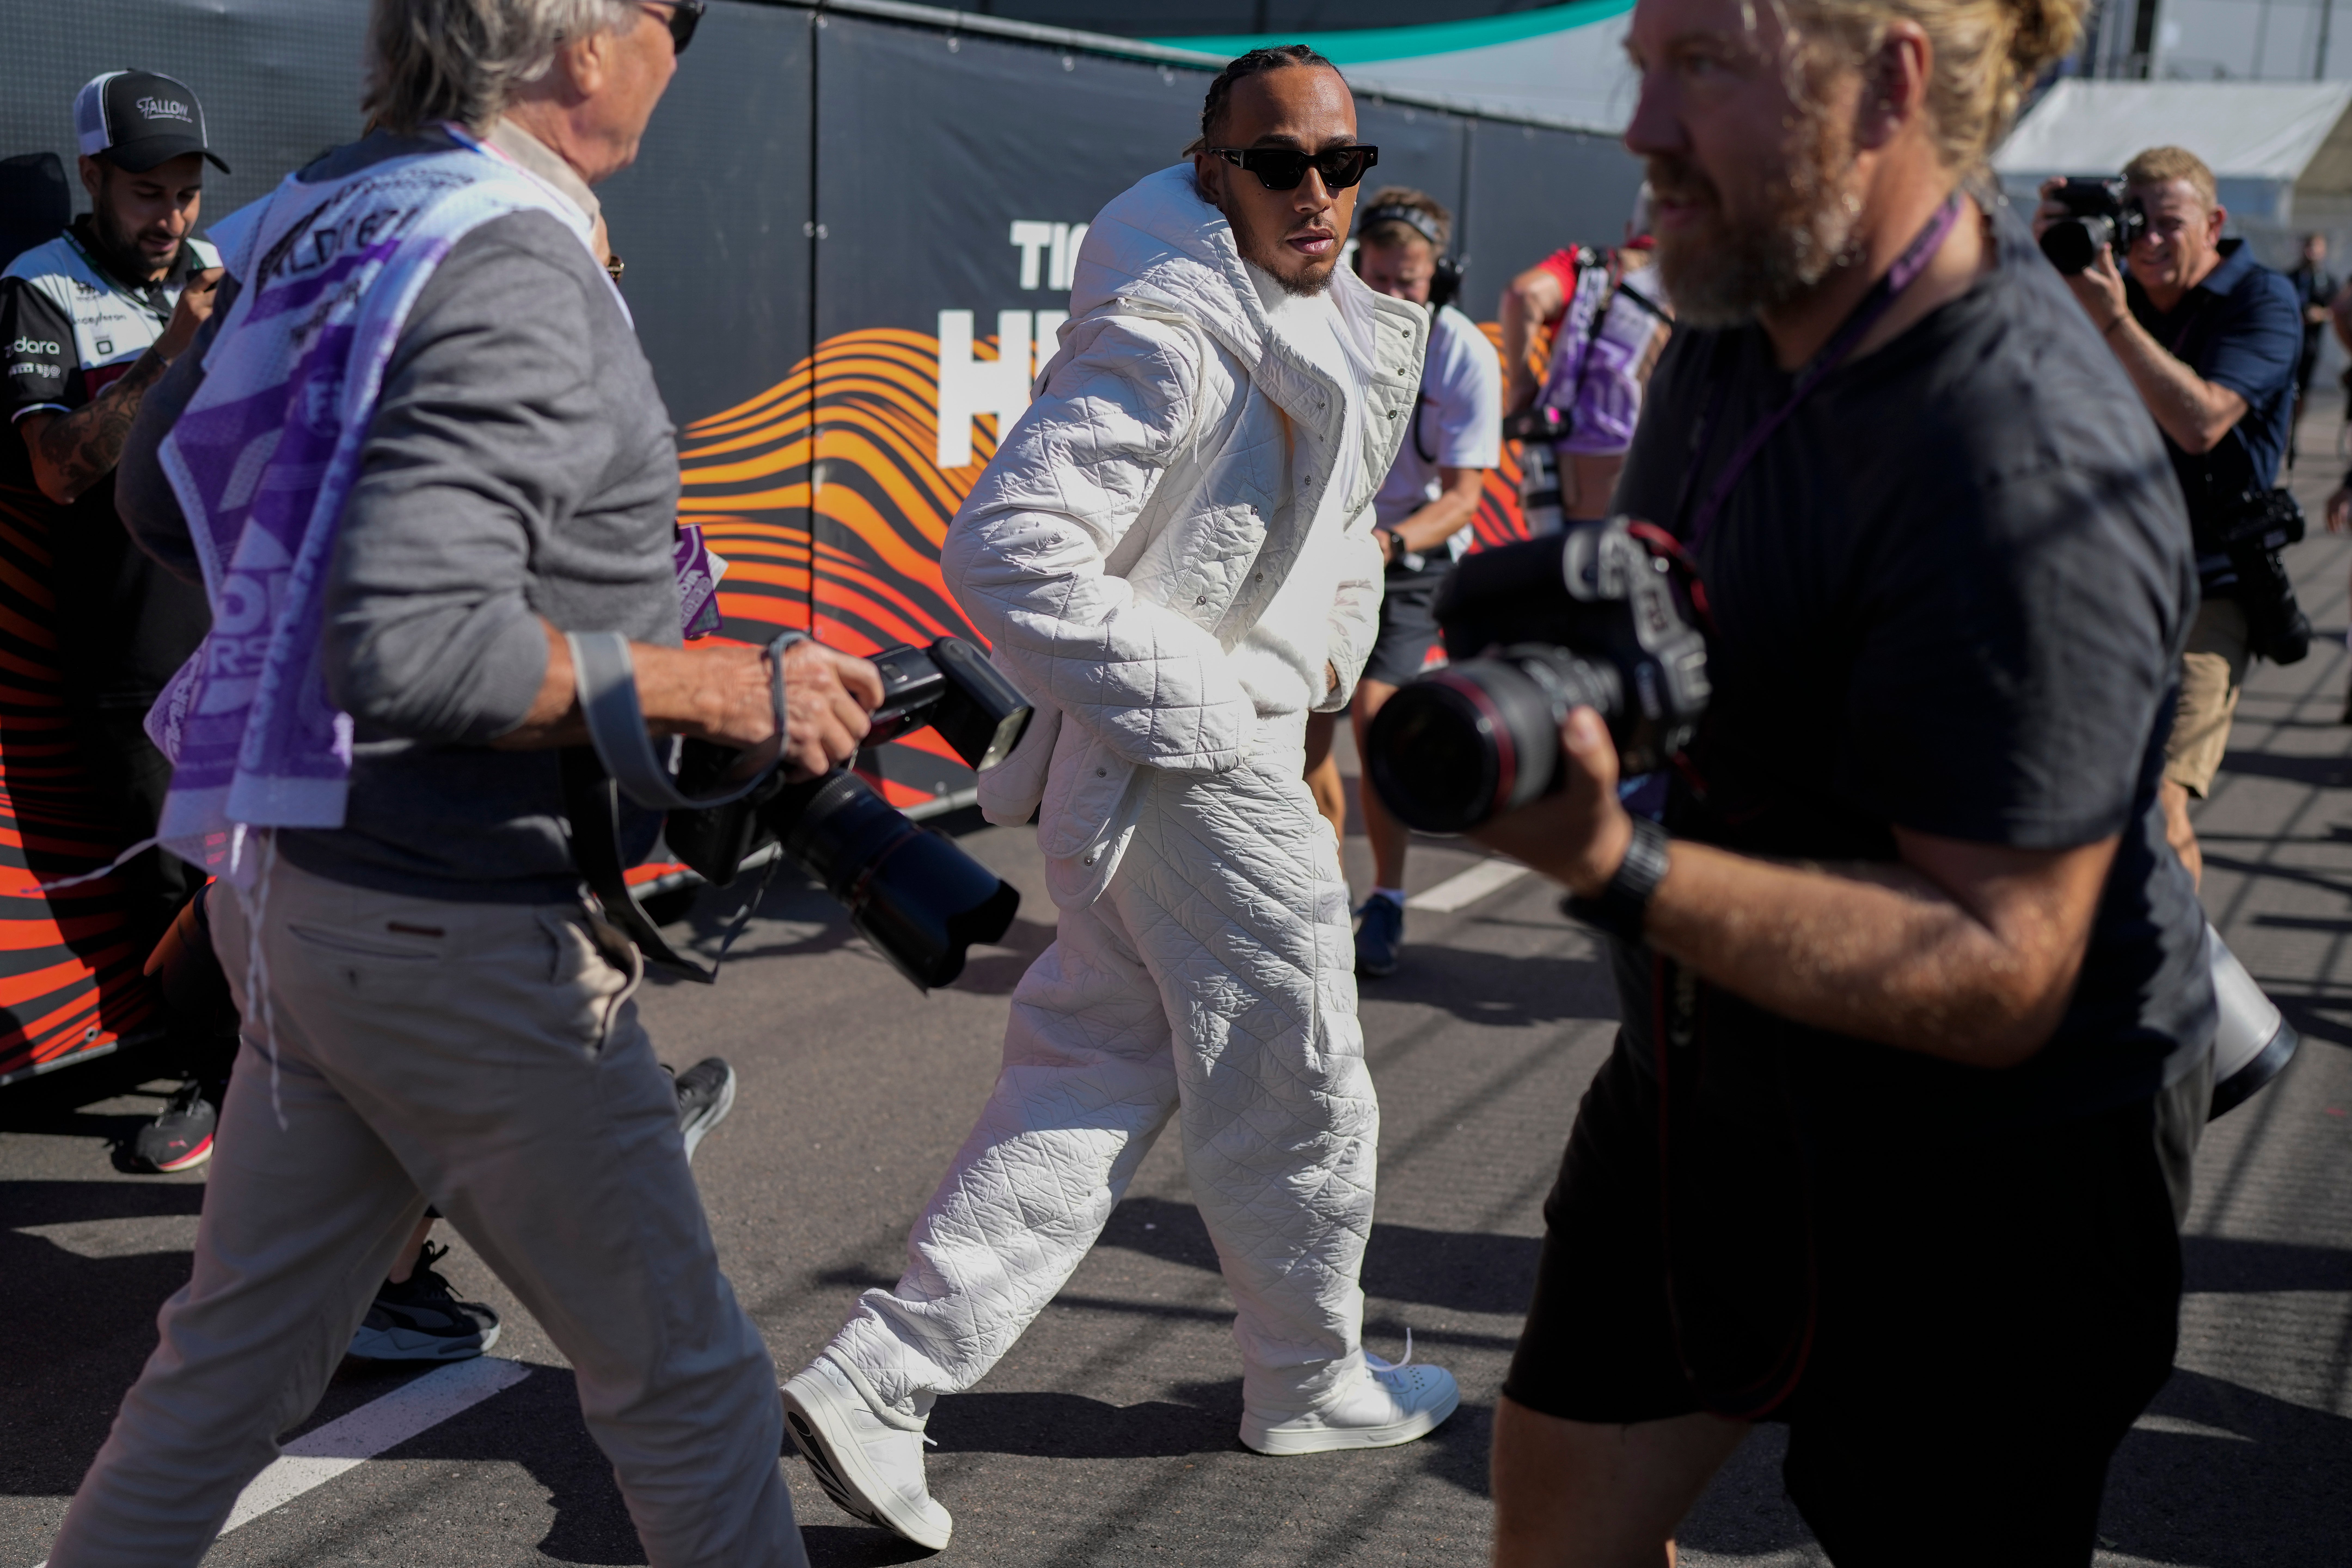 Lewis Hamilton will be fourth on the grid for Sunday’s Dutch Grand Prix (Peter Dejong/AP)